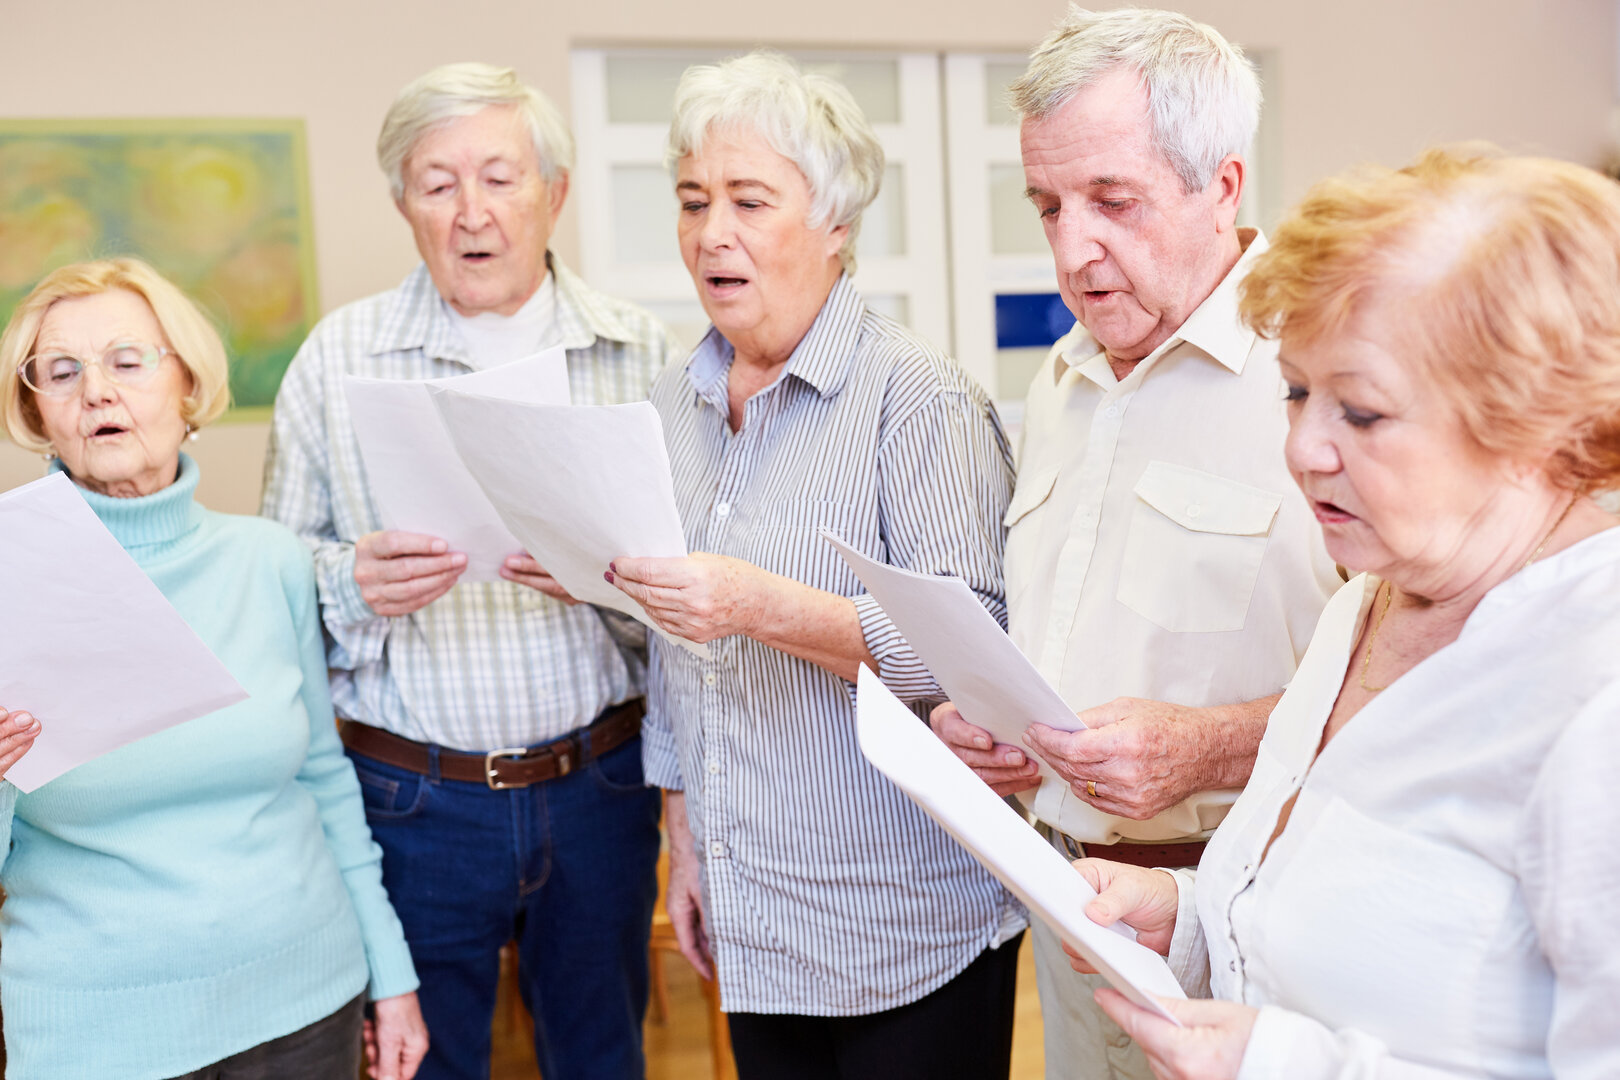 Seniors group sings together in a choir in their free time or as a dementia therapy